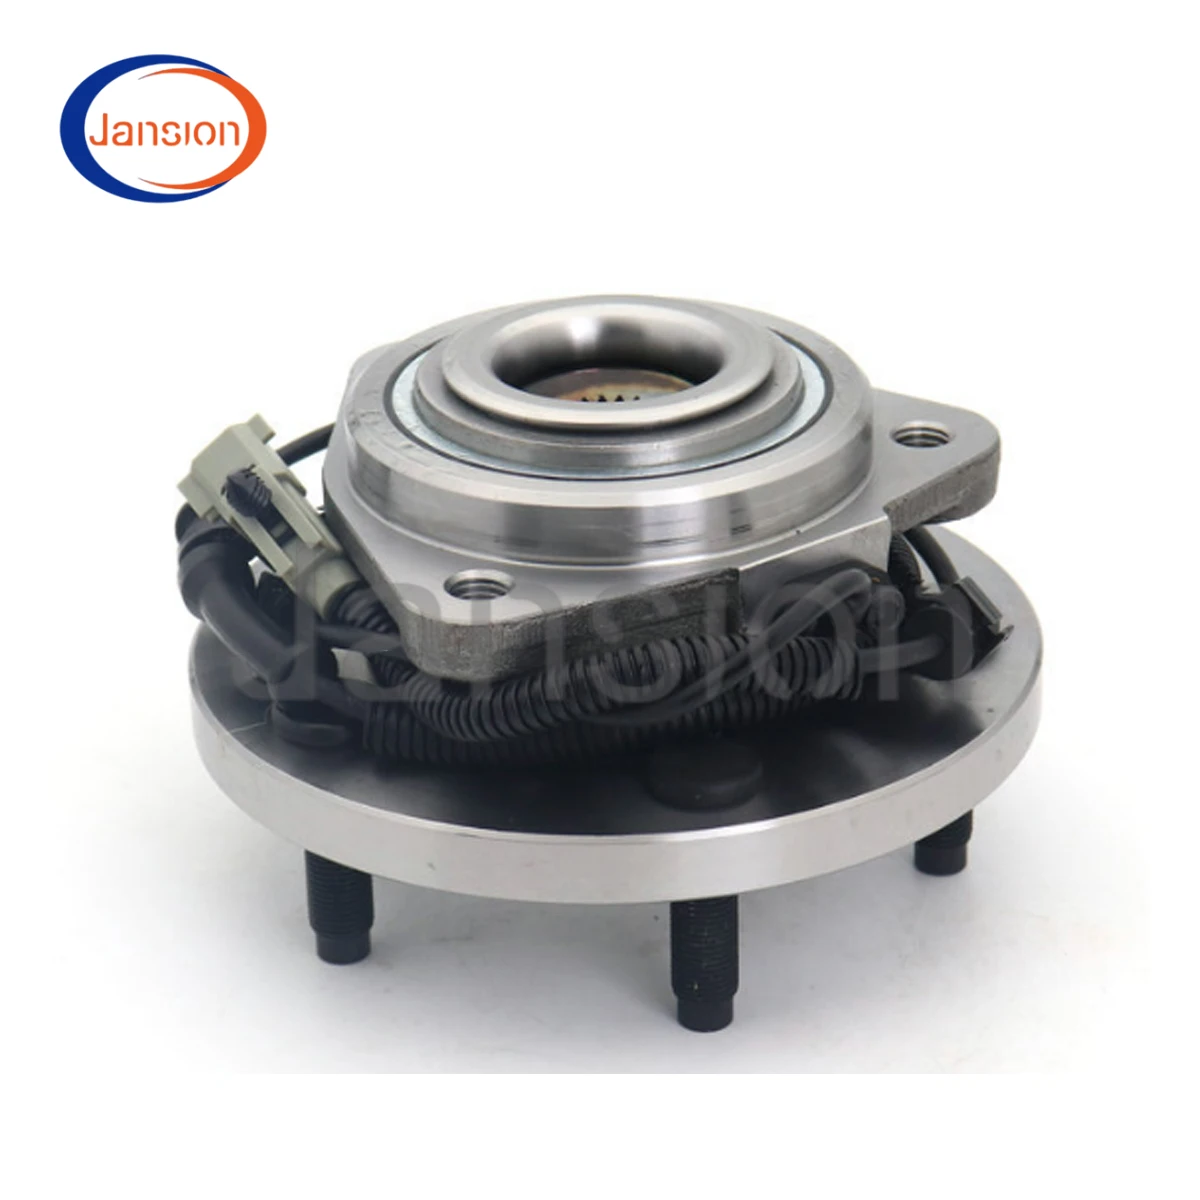 

513234 2005-2010 52089434AA 52089434AB 52089434AC Front Wheel Hub Bearing Fit For JEEP GRAND CHEROKEE WH WK COMMANDER XK